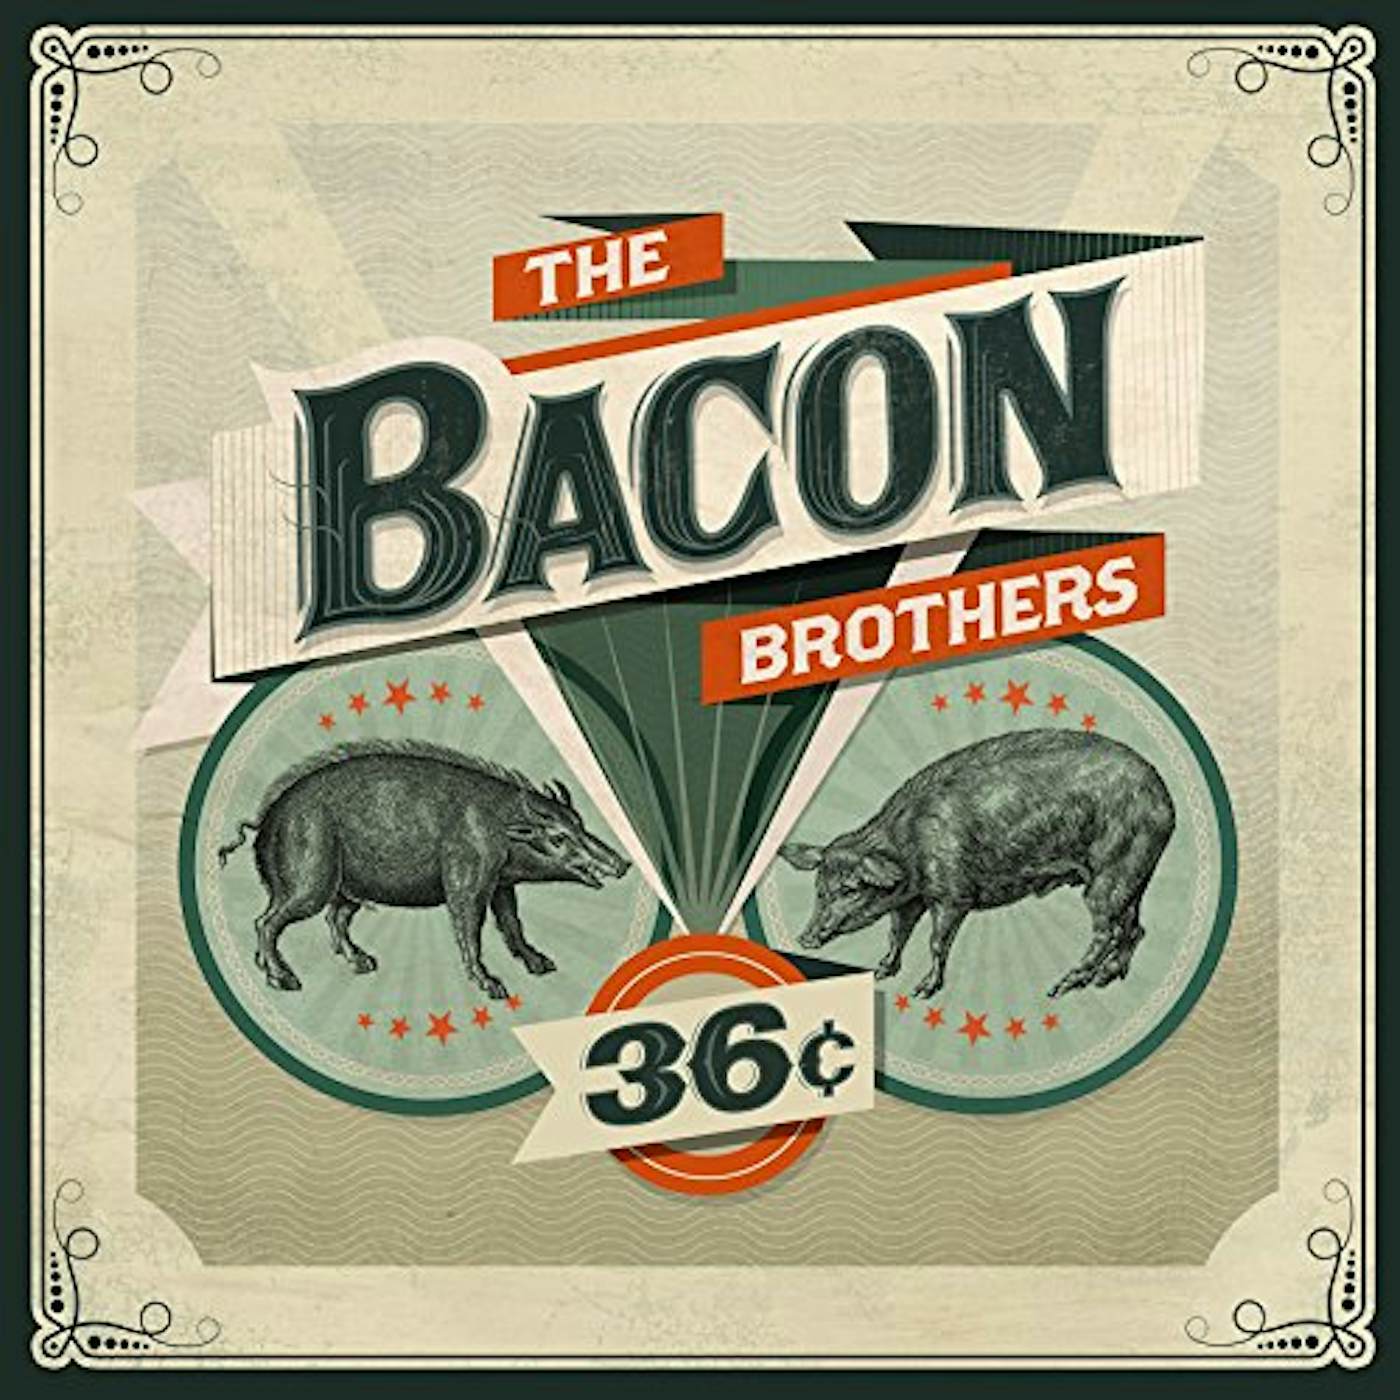 The Bacon Brothers 36 CENTS CD